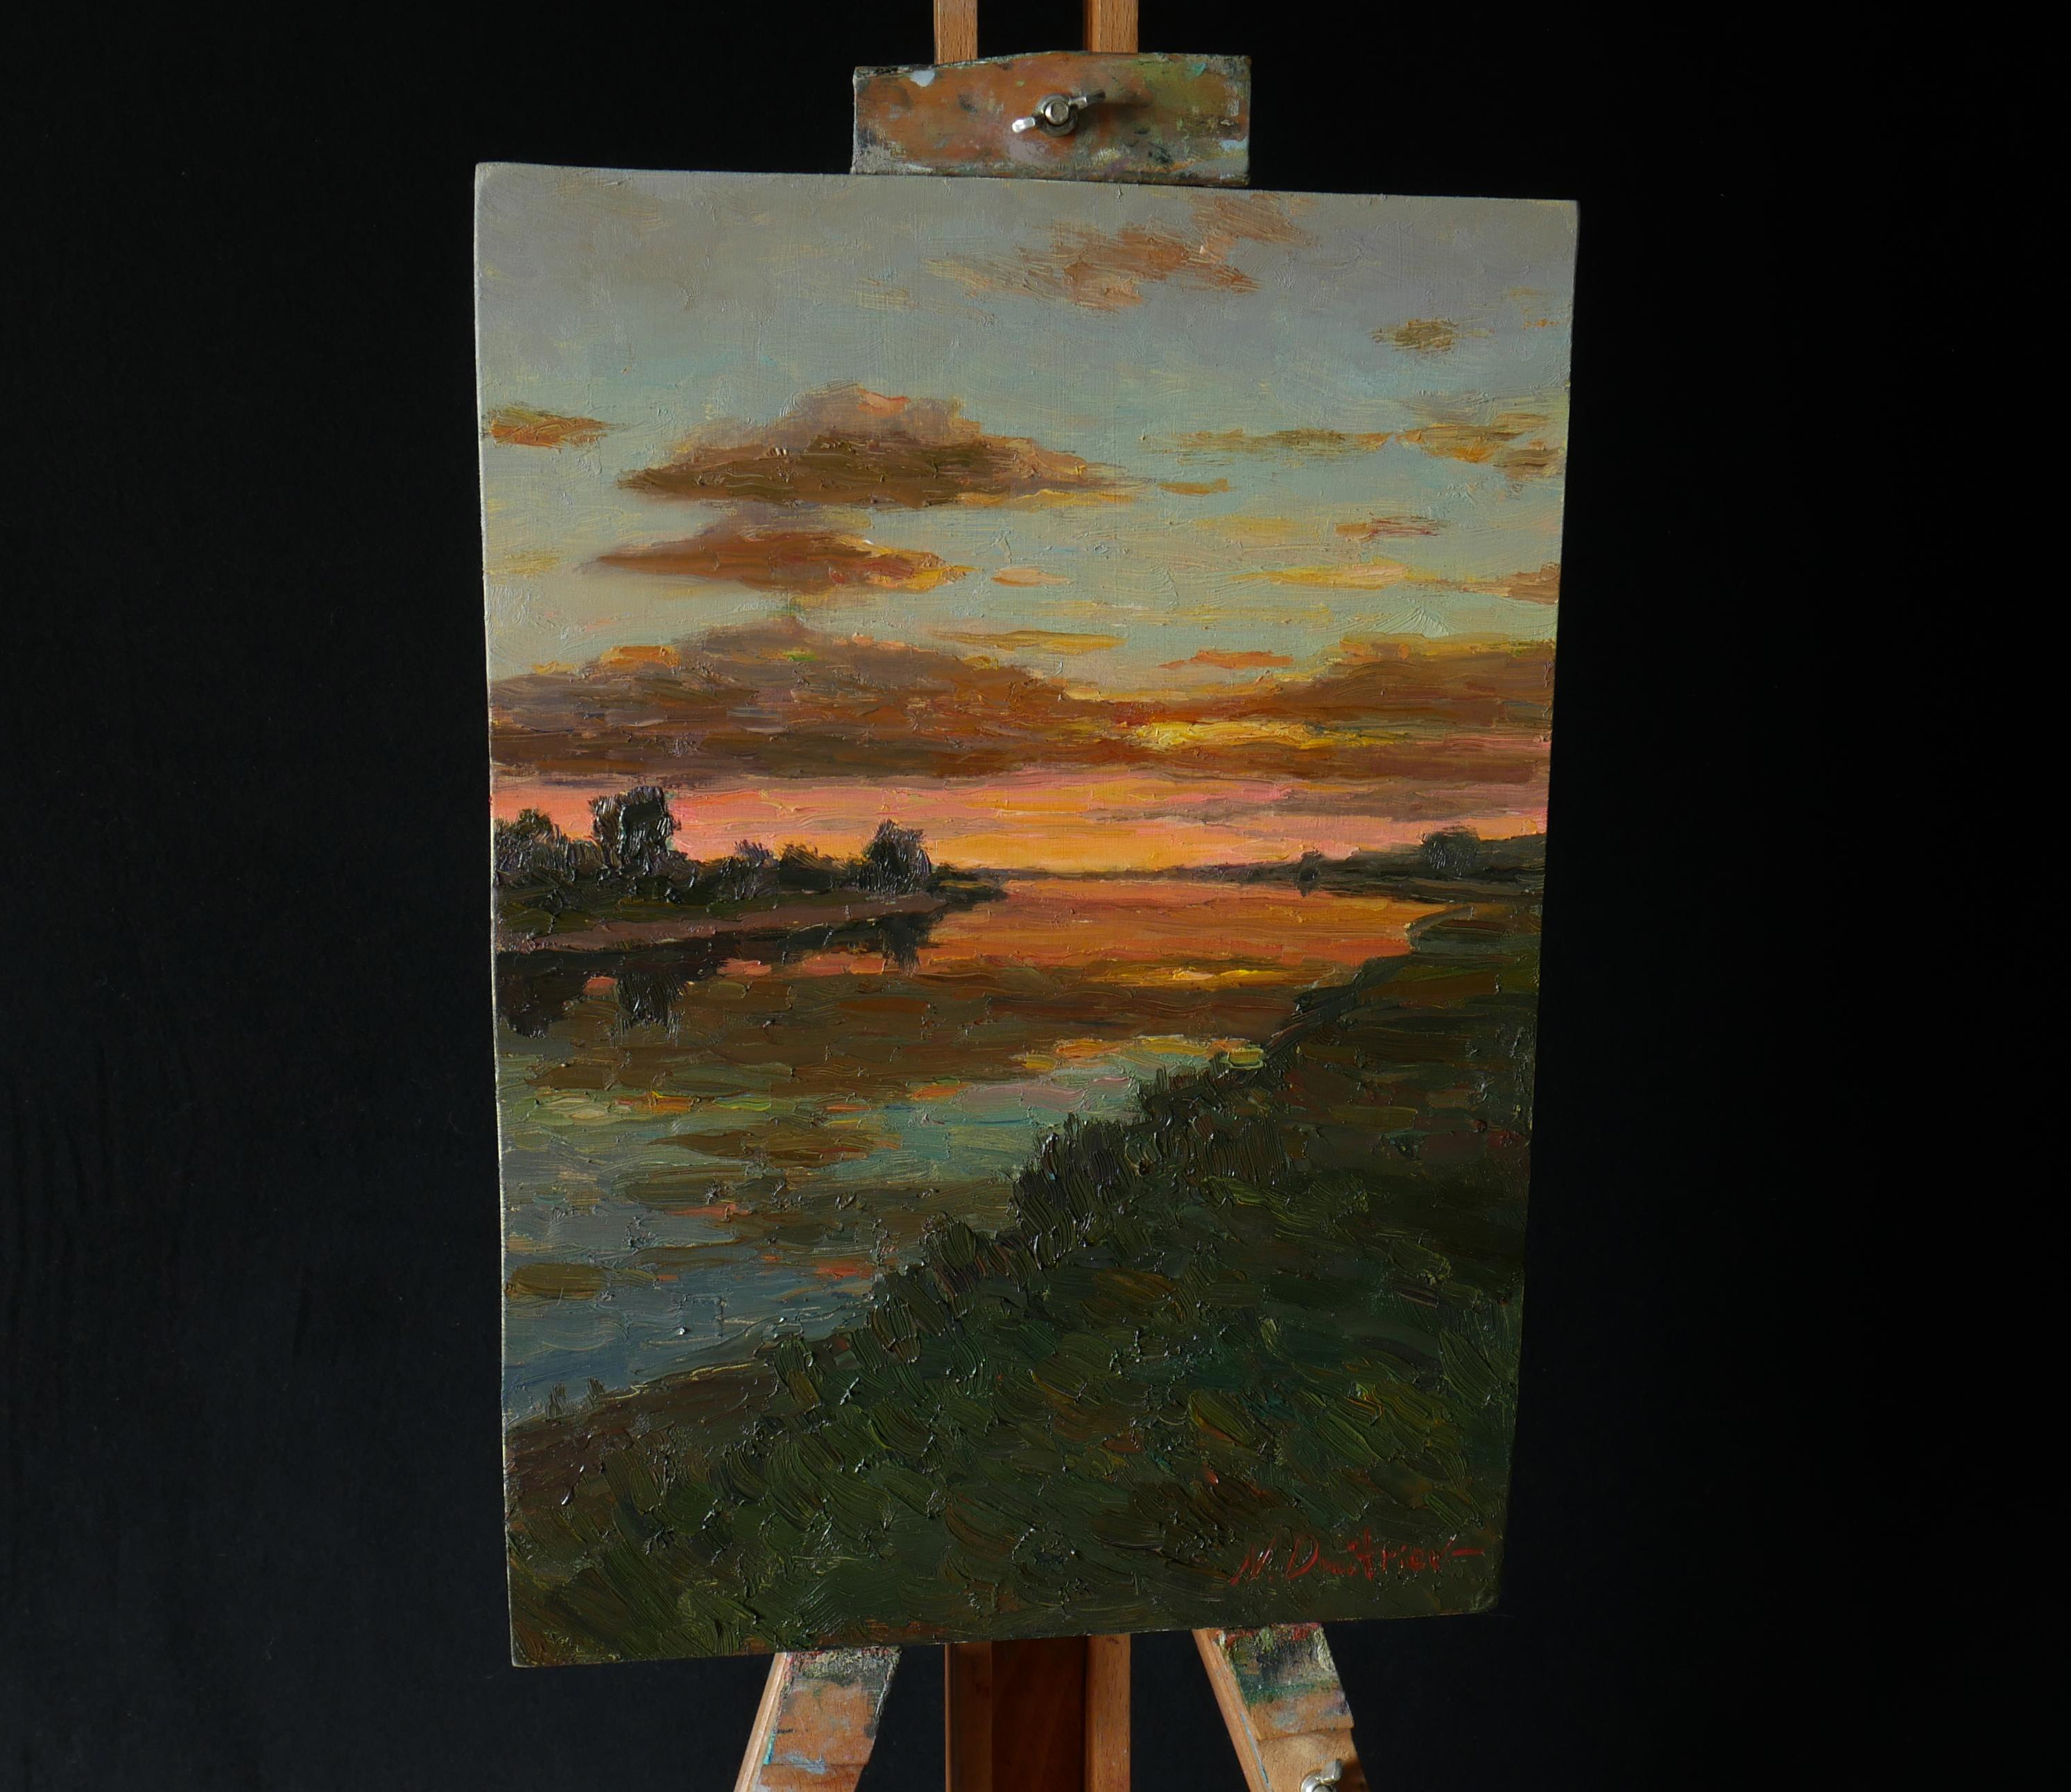 Sunset over the river - sunset landscape painting - Painting by Nikolay Dmitriev